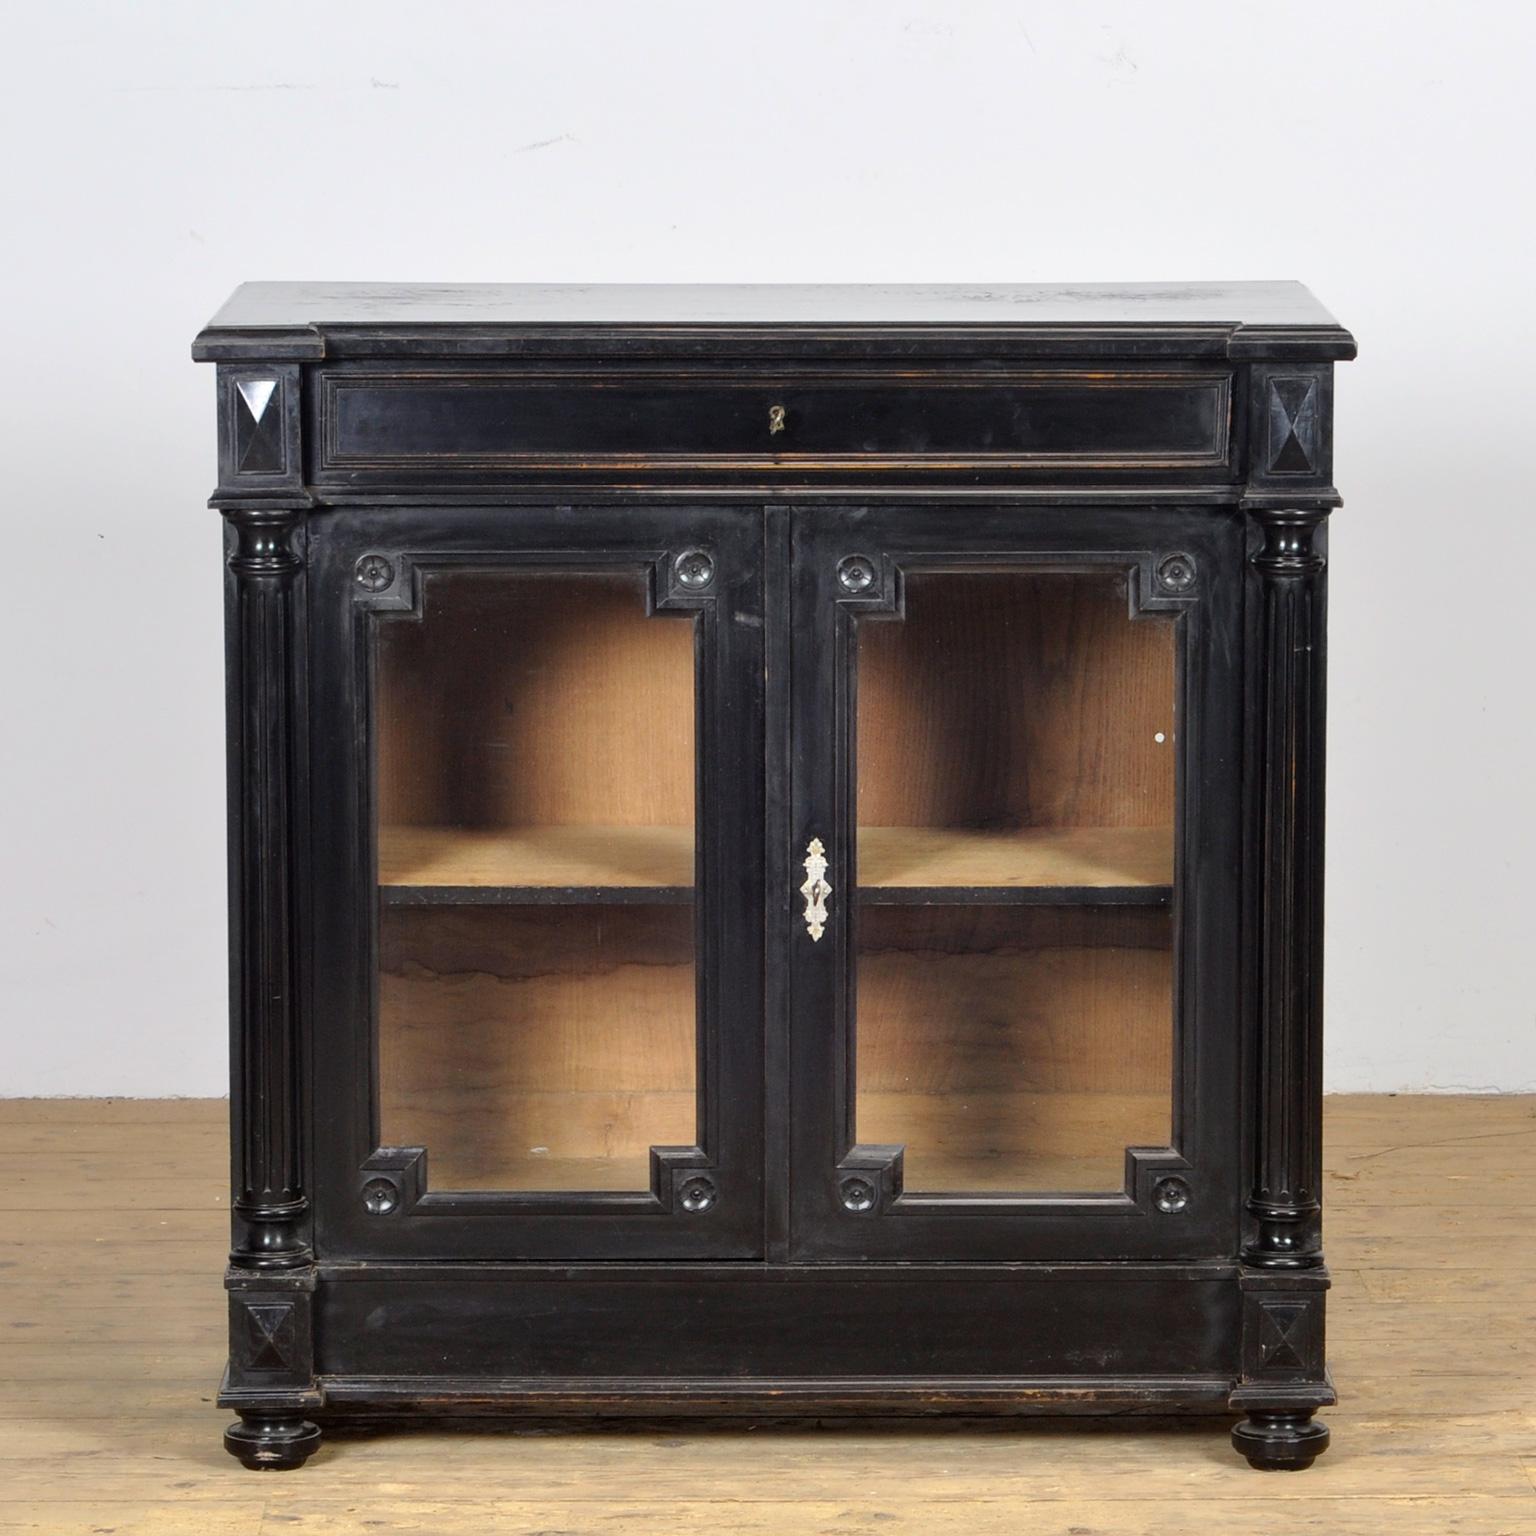 An oak French Empire style dresser from circa 1920, with a drawer and display part. The cabinet has the original antique glass. Pilaster detailing on the edge of the sideboard and turned ball feet.